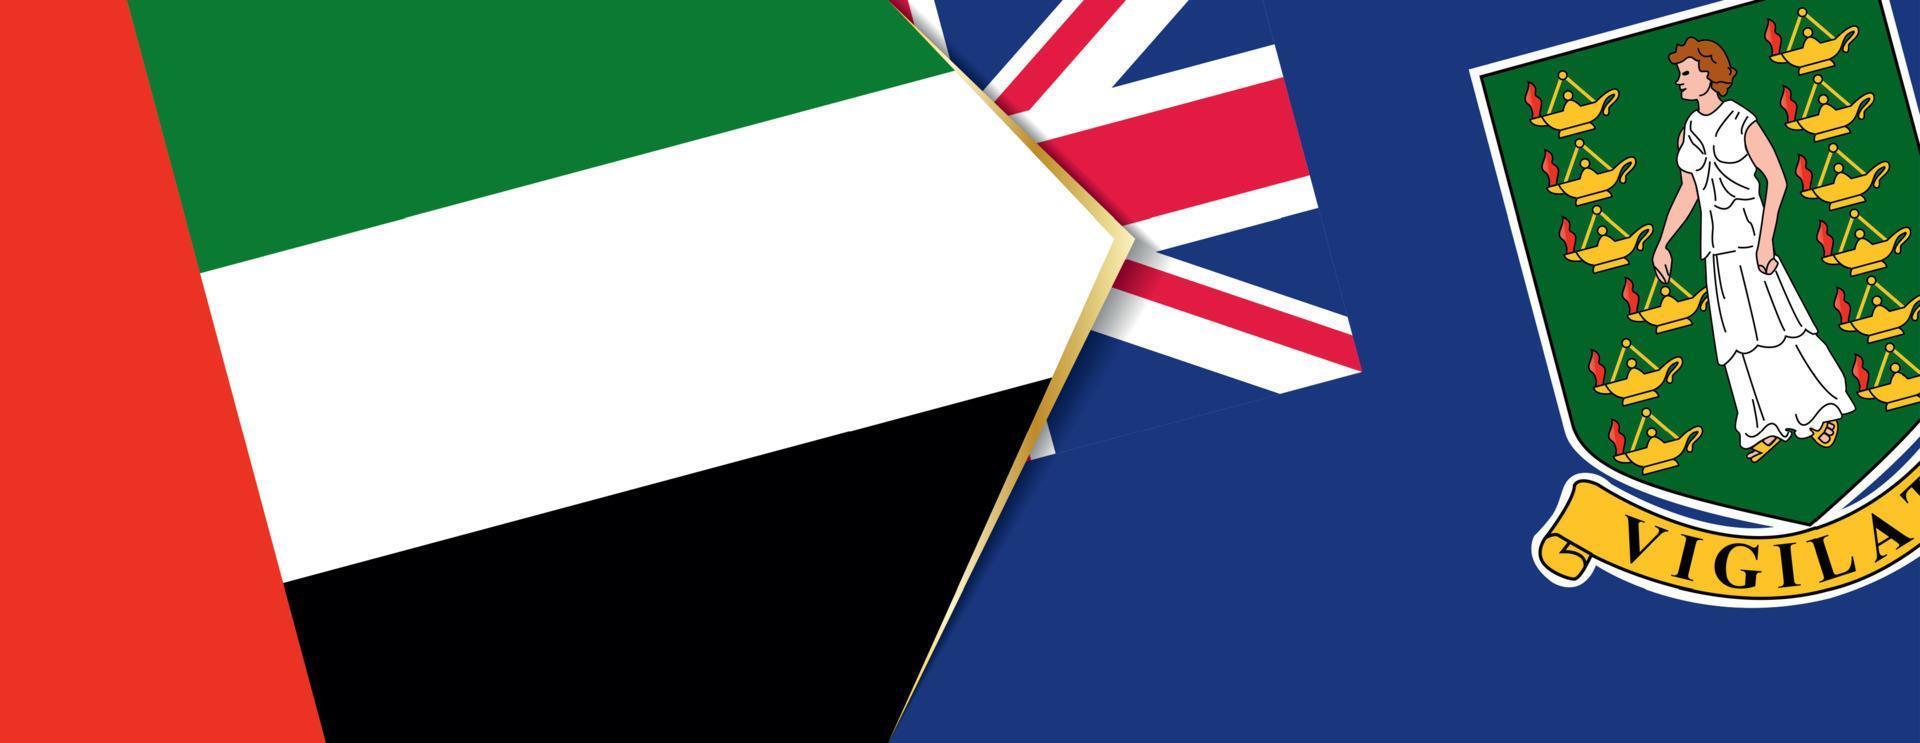 United Arab Emirates and British Virgin Islands flags, two vector flags.